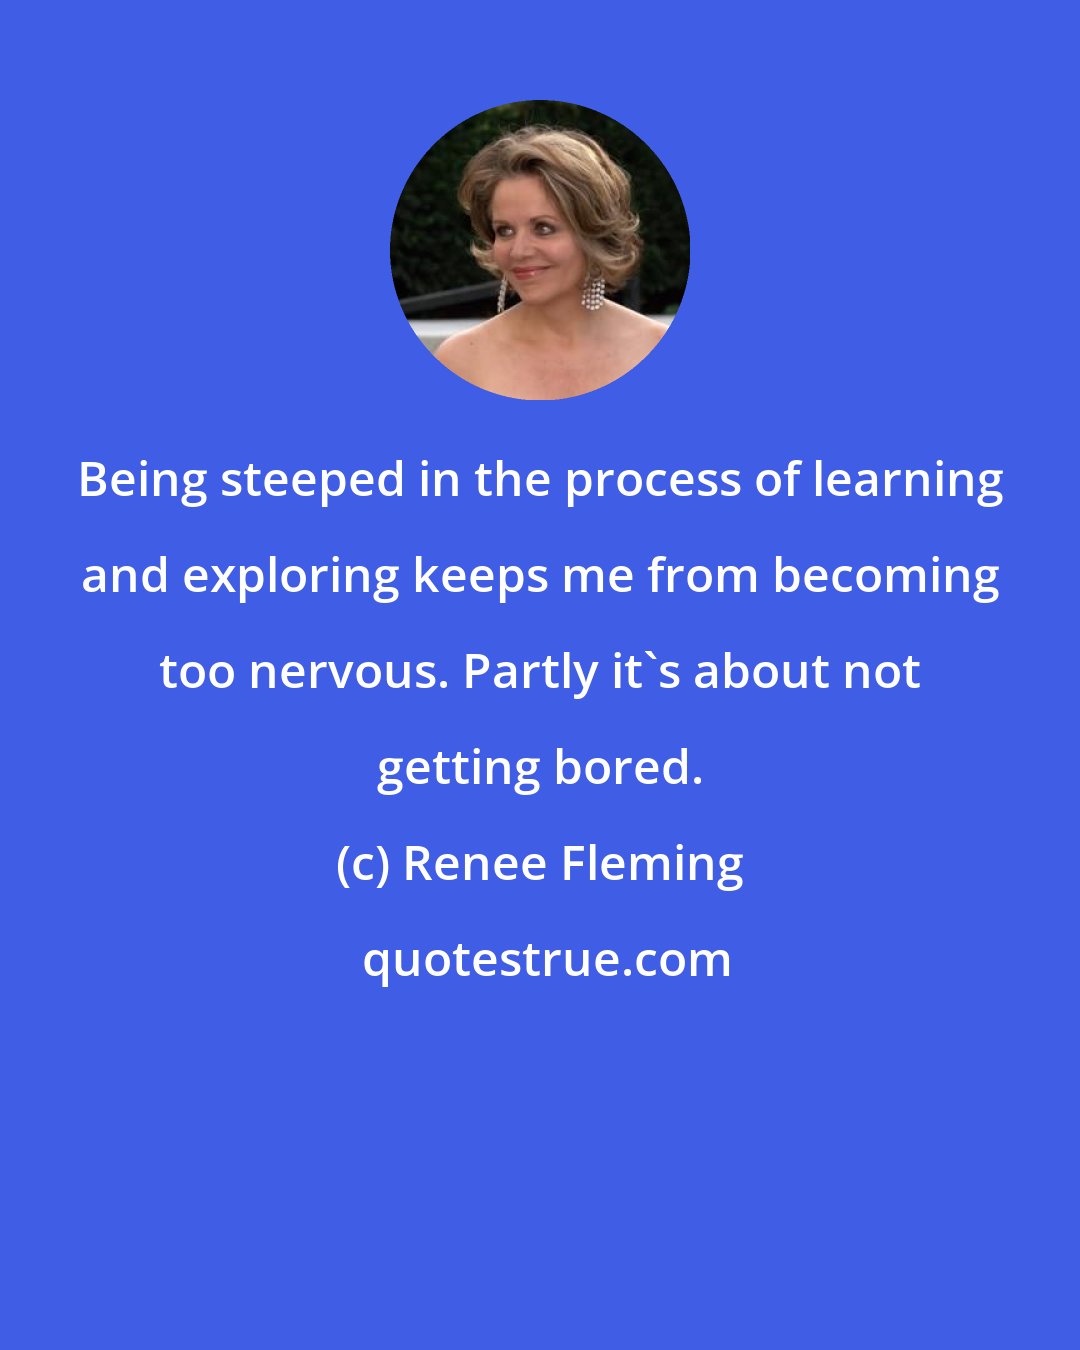 Renee Fleming: Being steeped in the process of learning and exploring keeps me from becoming too nervous. Partly it's about not getting bored.